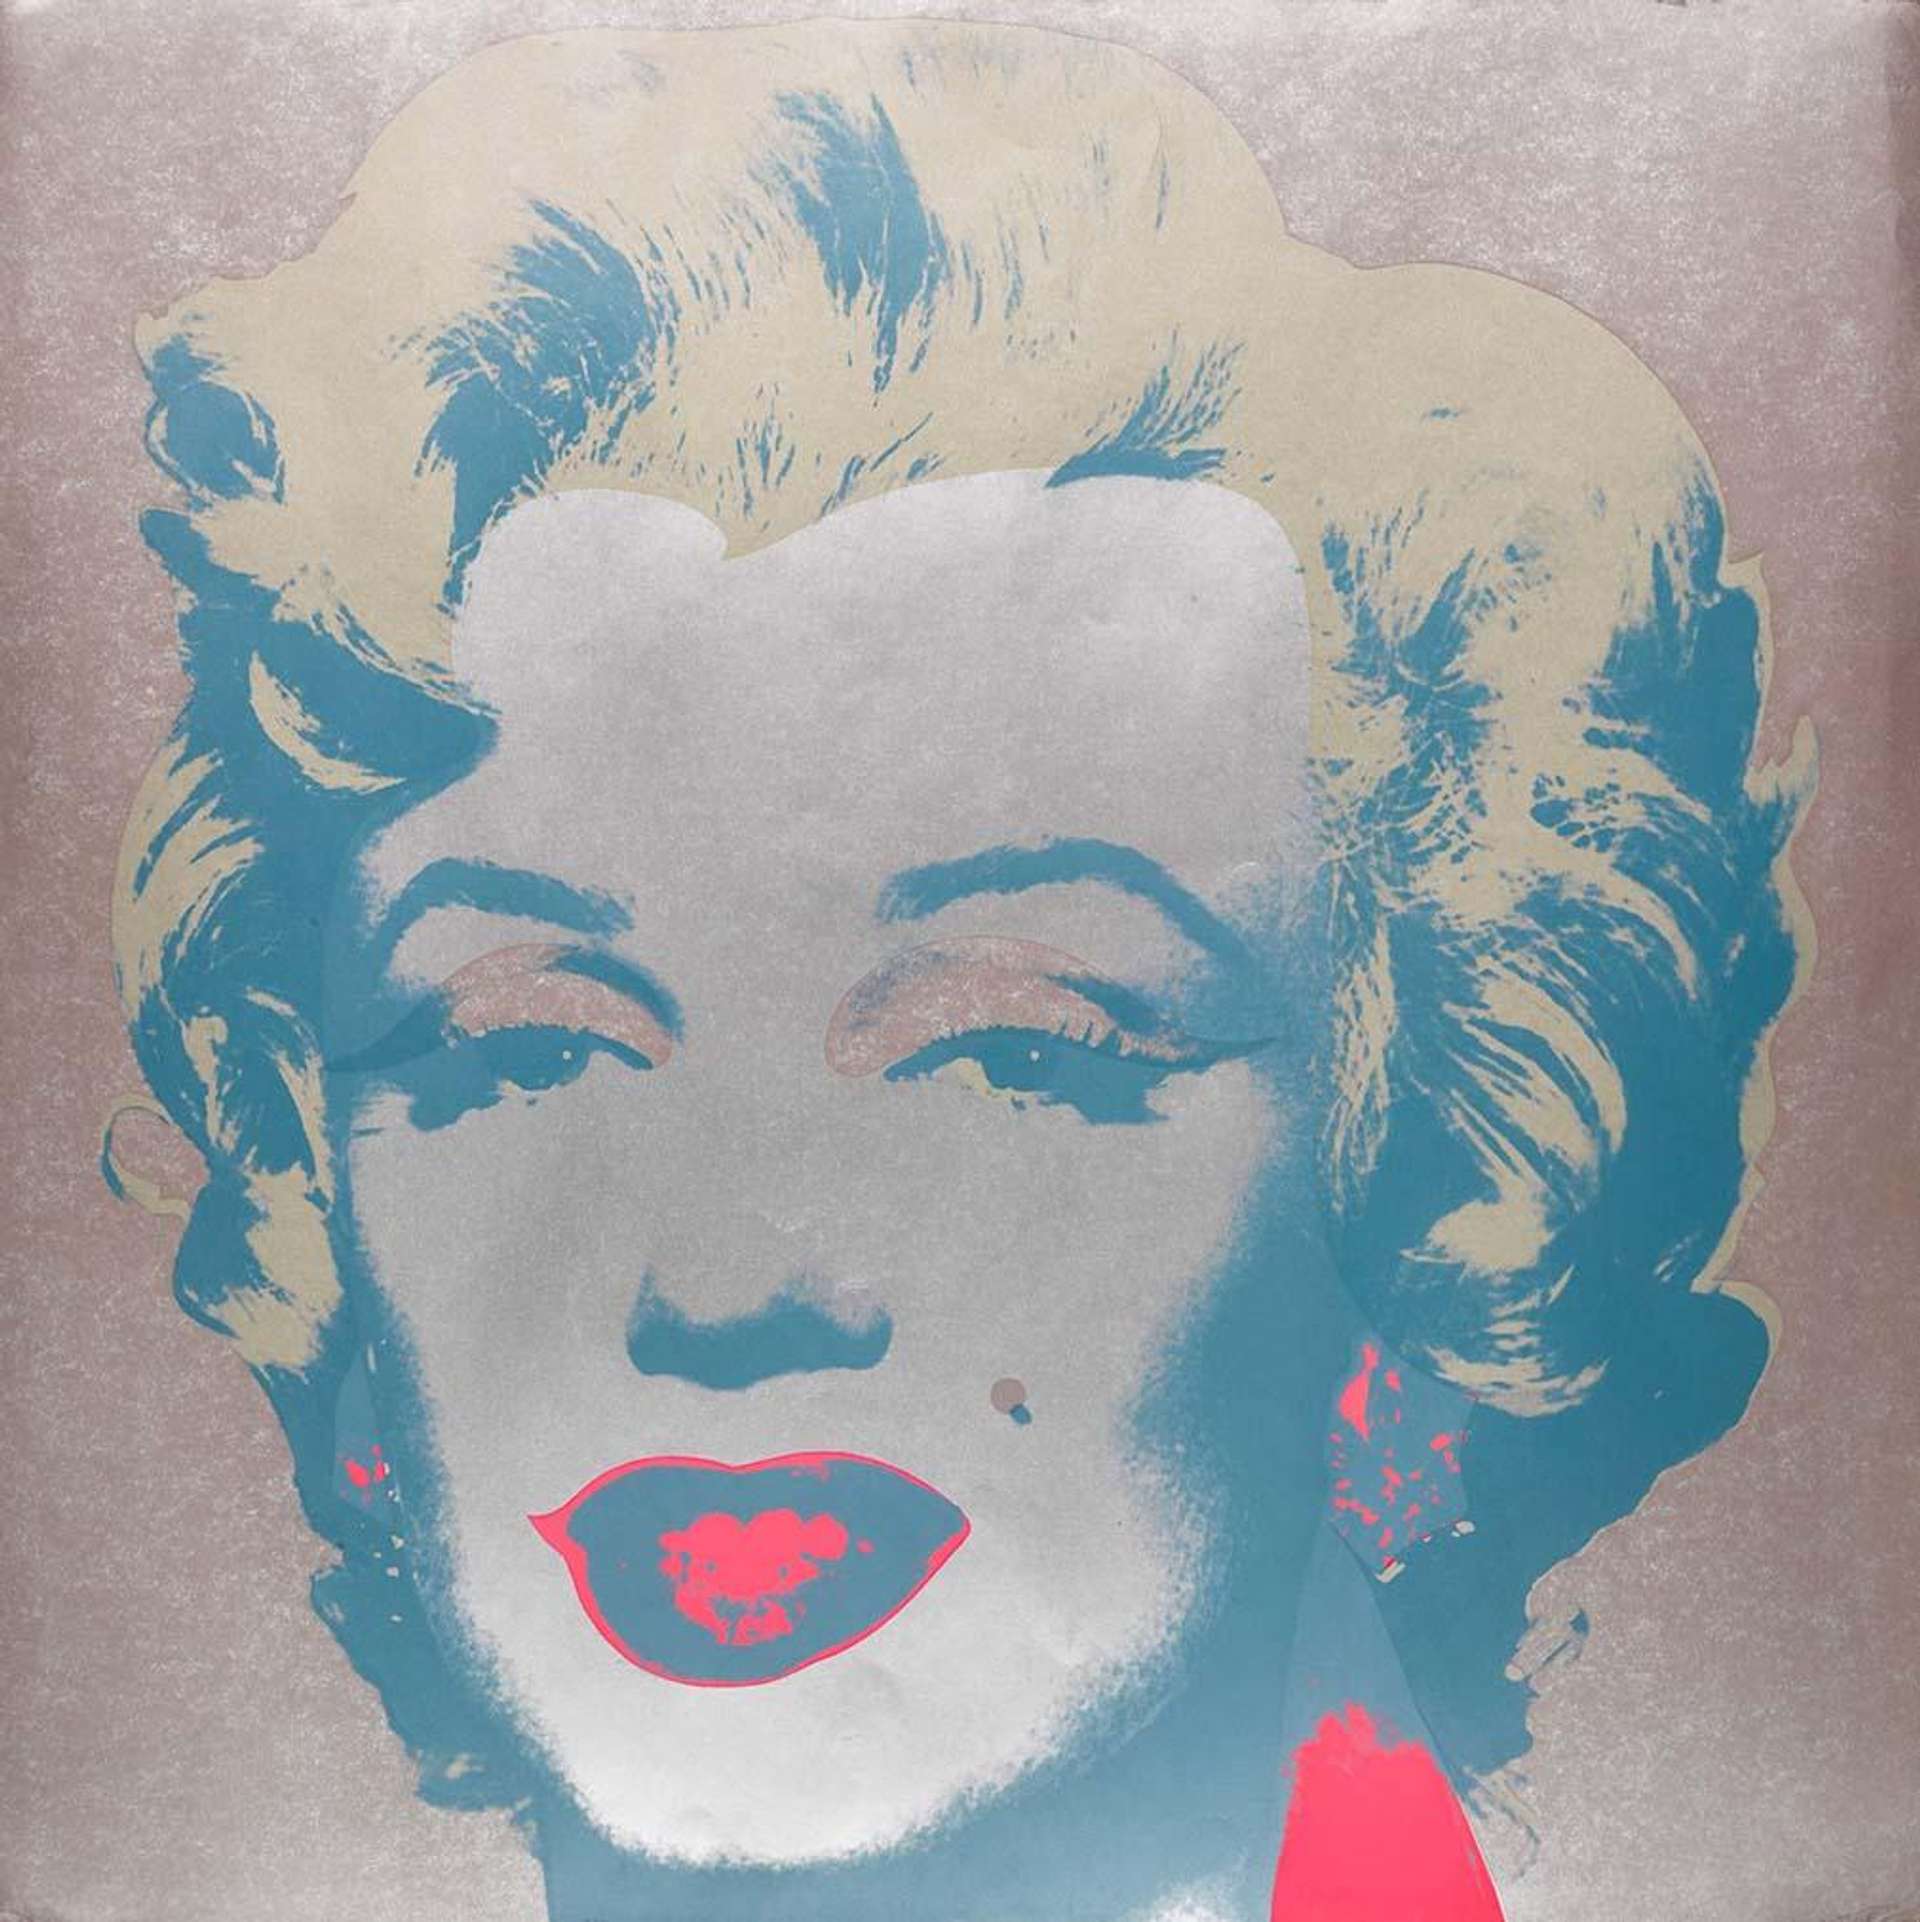 A screenprint by Andy Warhol depicting the portrait of Marilyn Monroe in blue, pink, and yellow against a silver background.